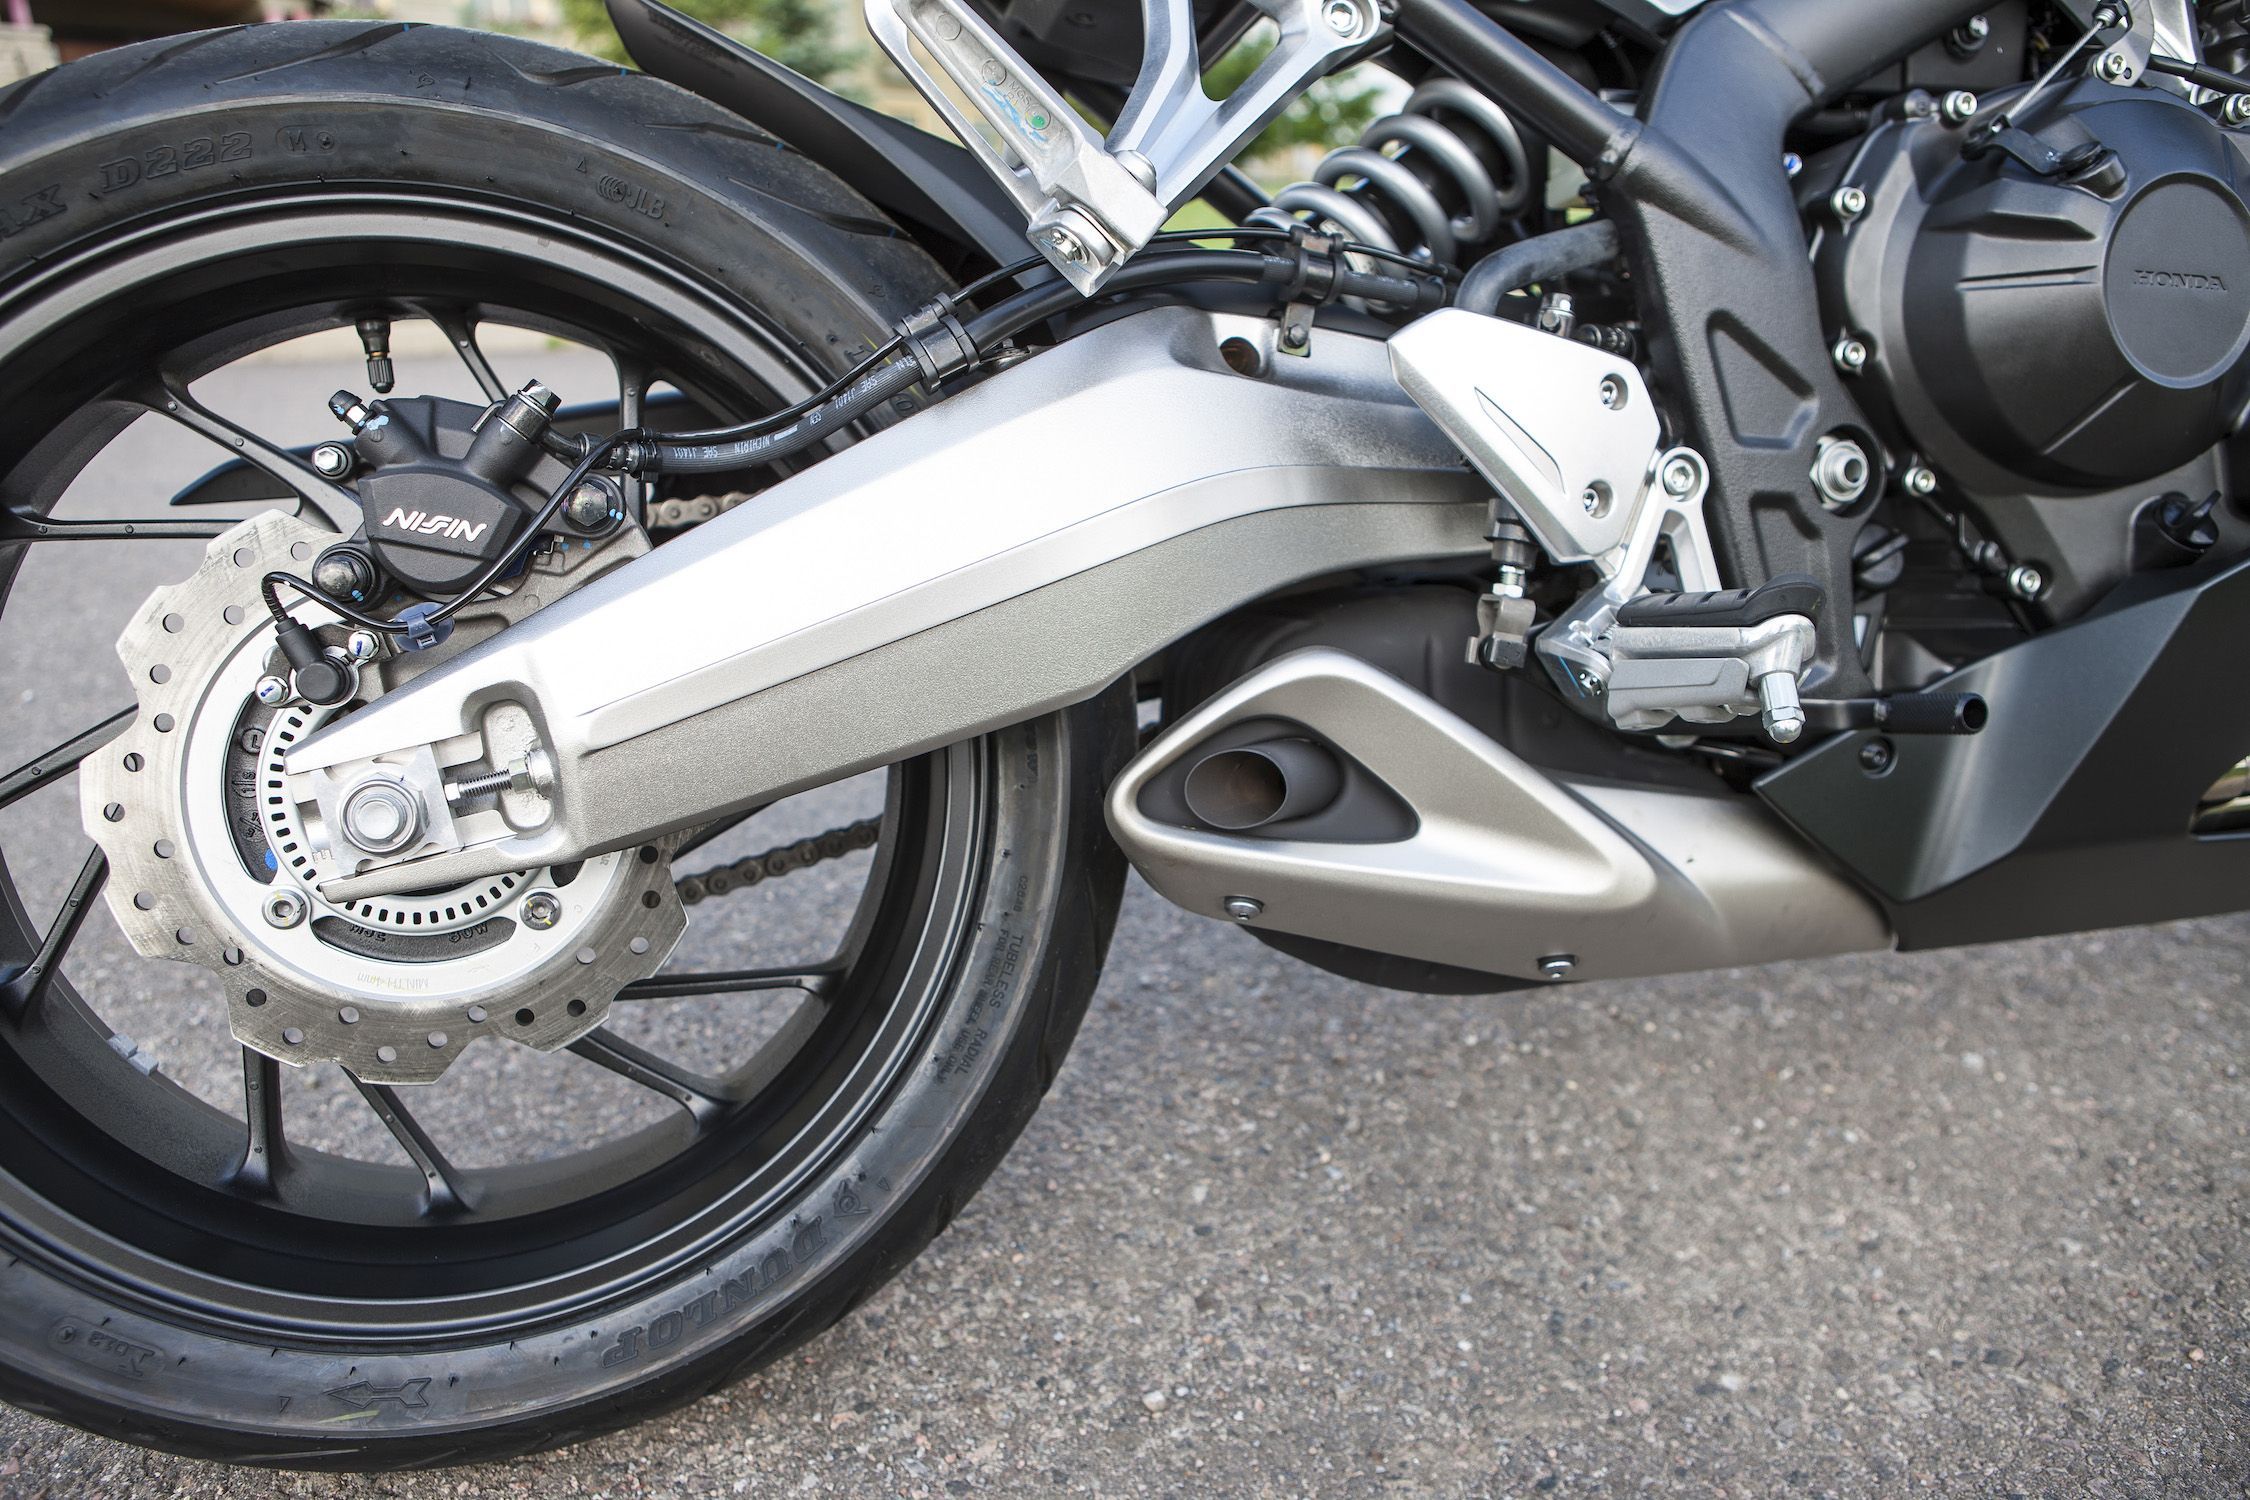 Underbelly exhaust helps keep the weight low - CBR650F